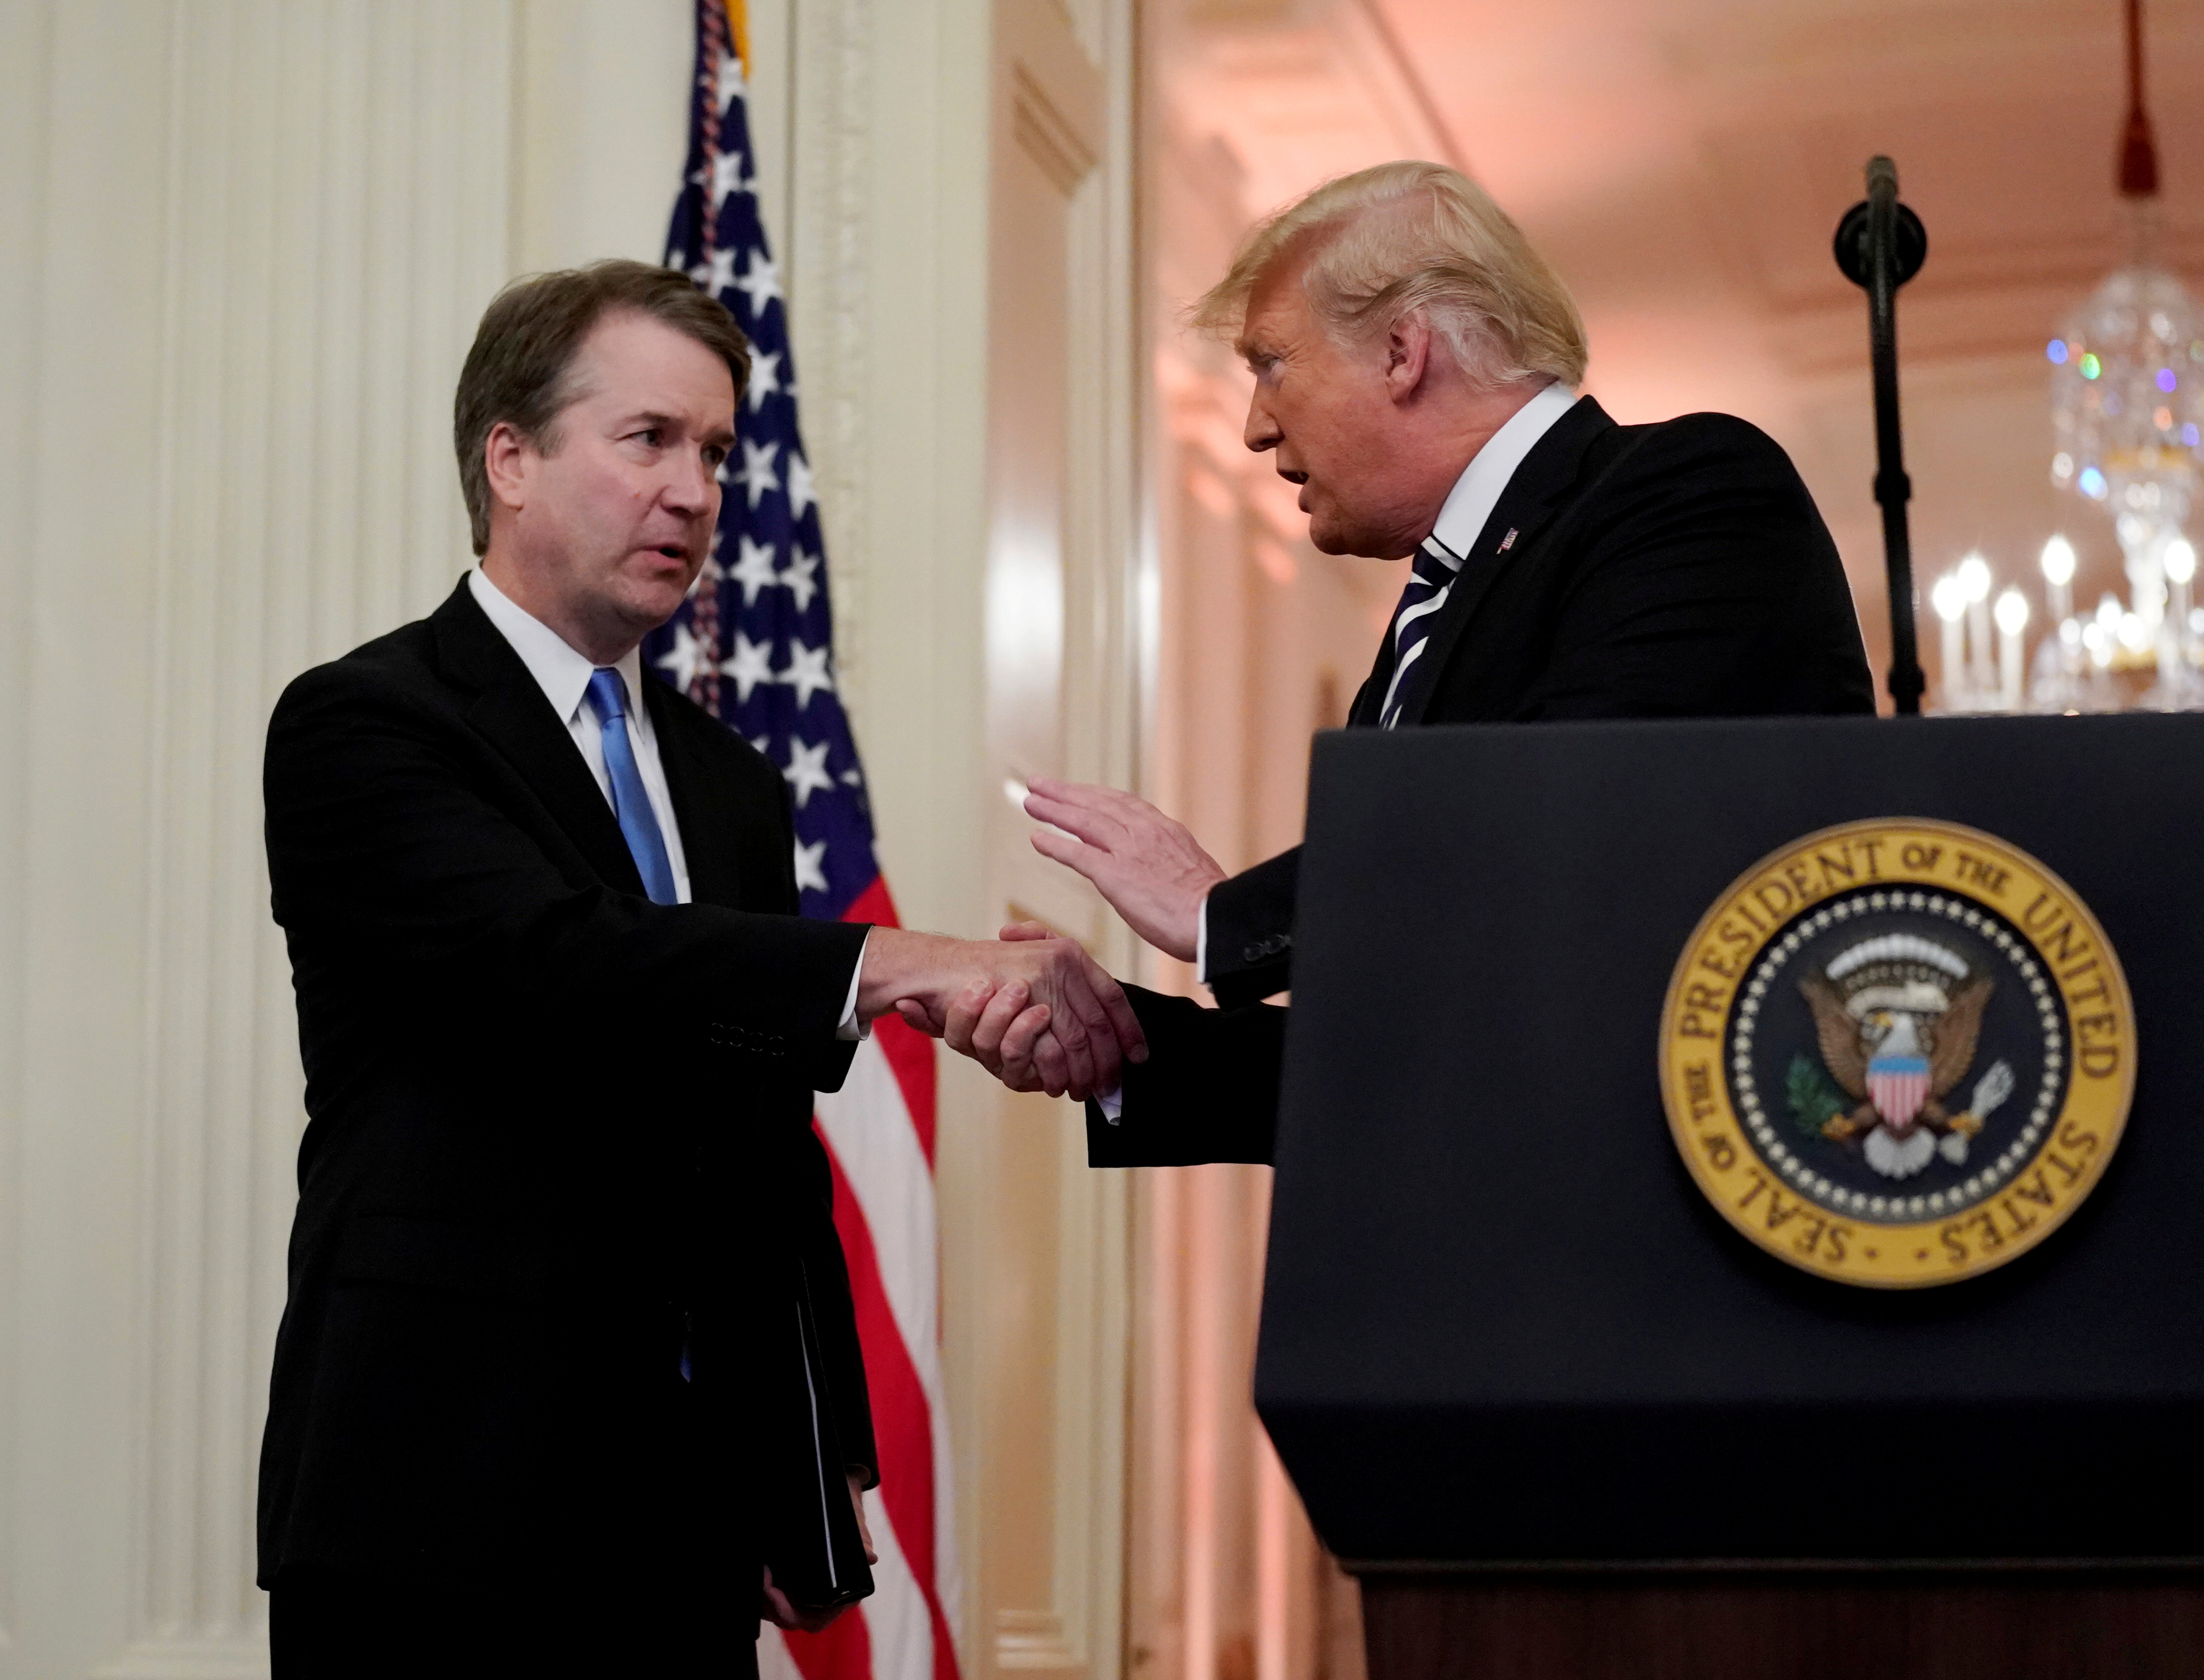 U.S. Supreme Court Associate Justice Brett Kavanaugh talks with U.S. President Donald Trump during his ceremonial public swearing-in at the East Room of the White House in Washington, U.S., October 8, 2018.  REUTERS/Jonathan Ernst/File Photo